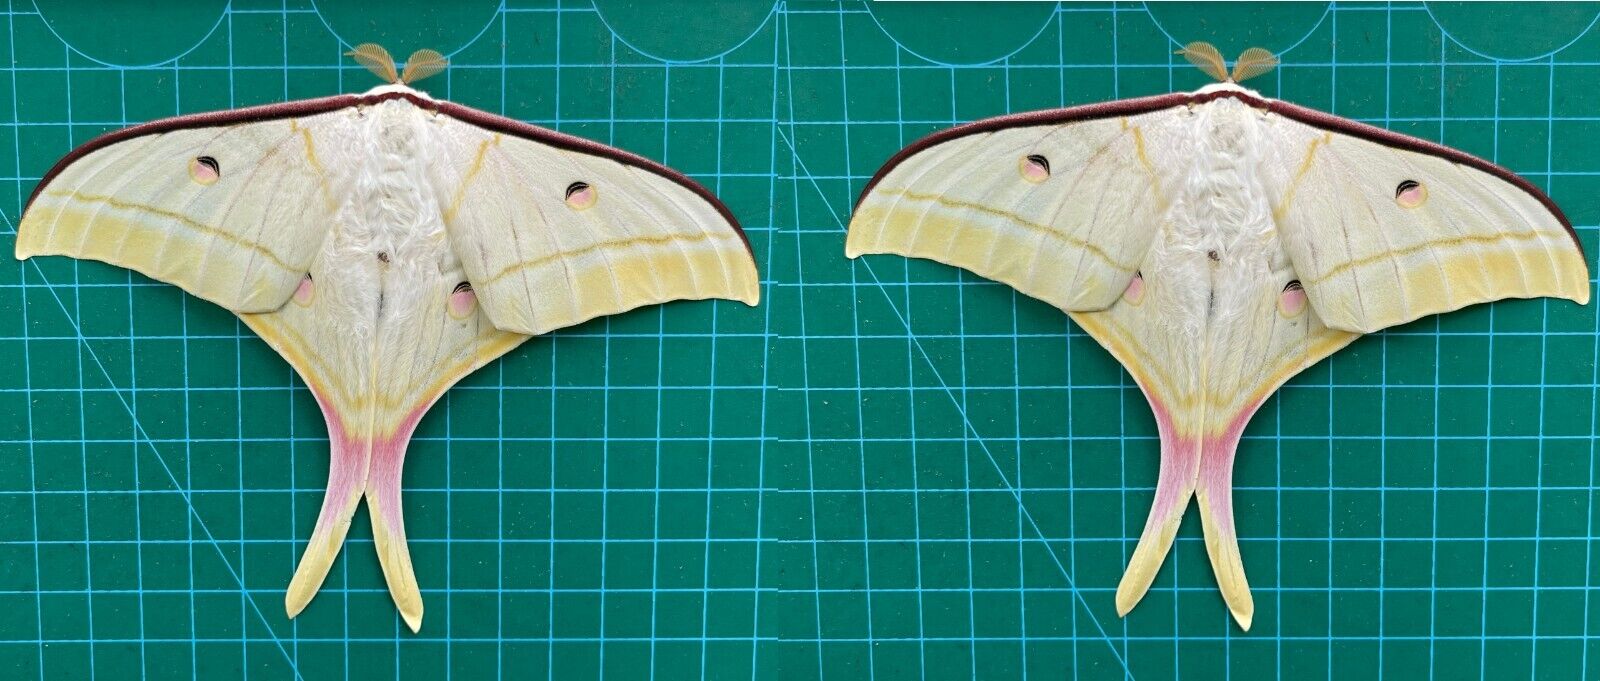 2 Real Luna Moth Spread Taxidermy Insect Specimen Art Entomology Collection